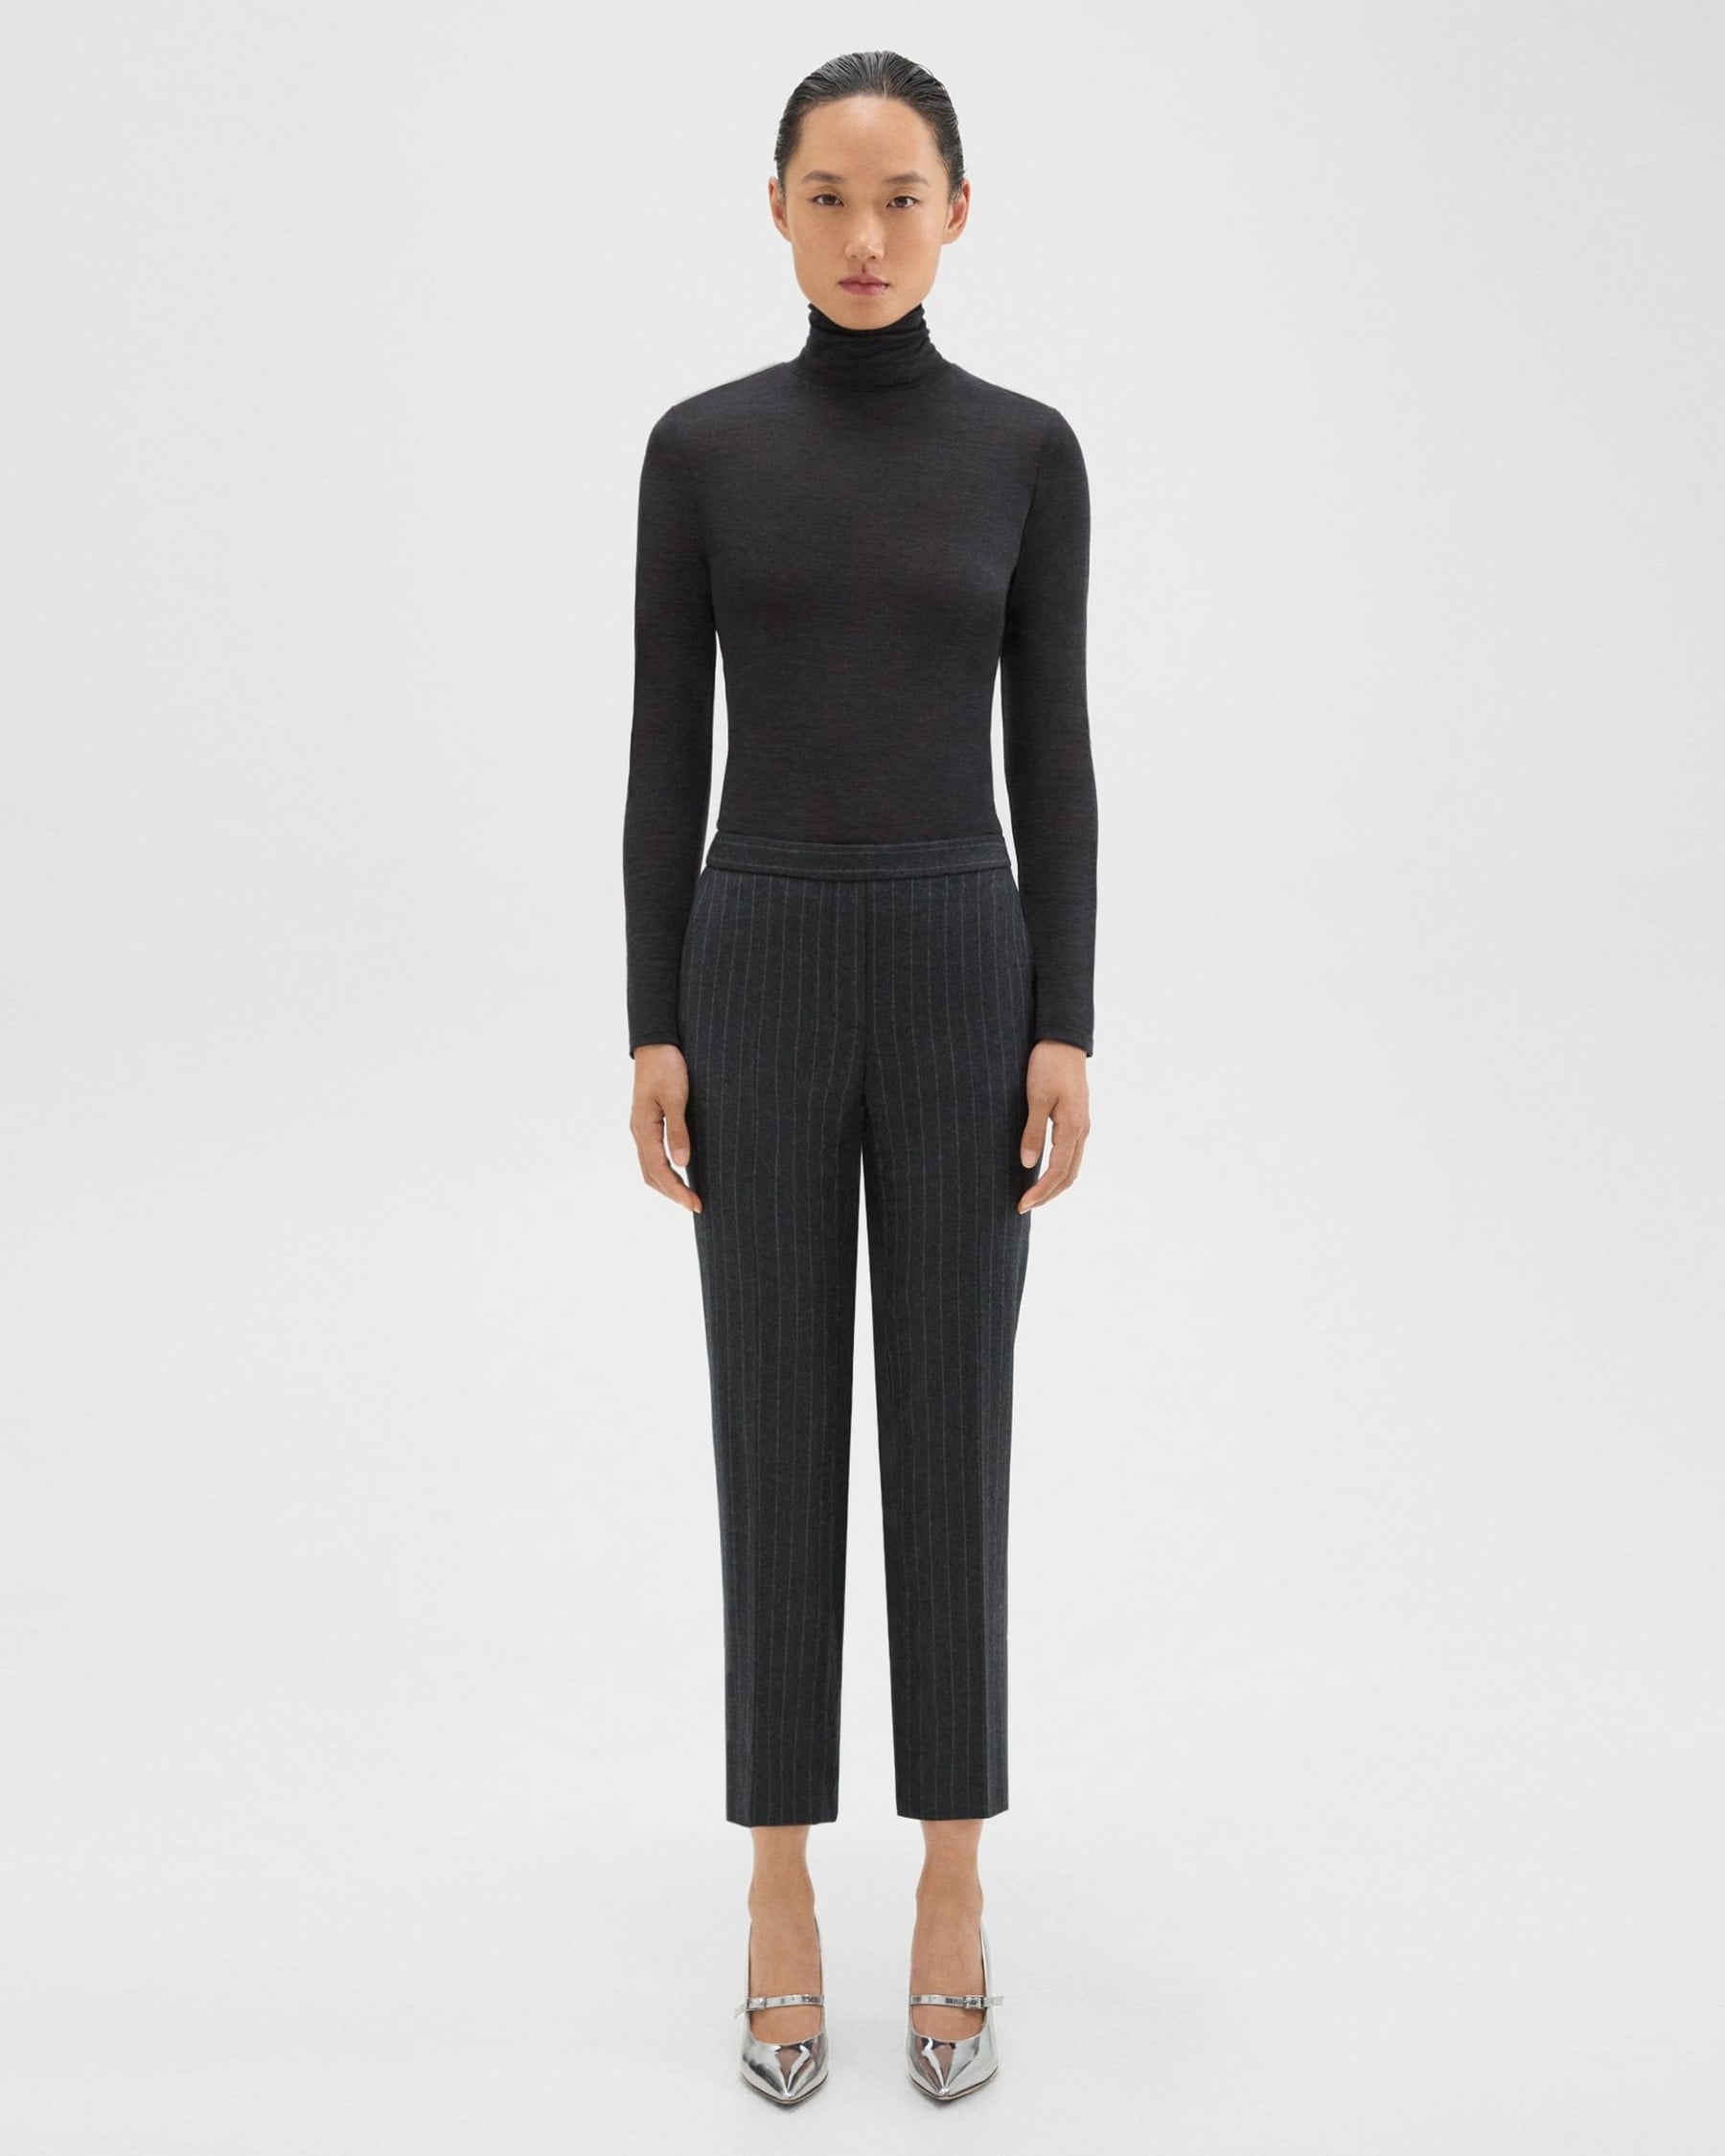 Theory Treeca Pull-On Pant in Pinstripe Wool Flannel